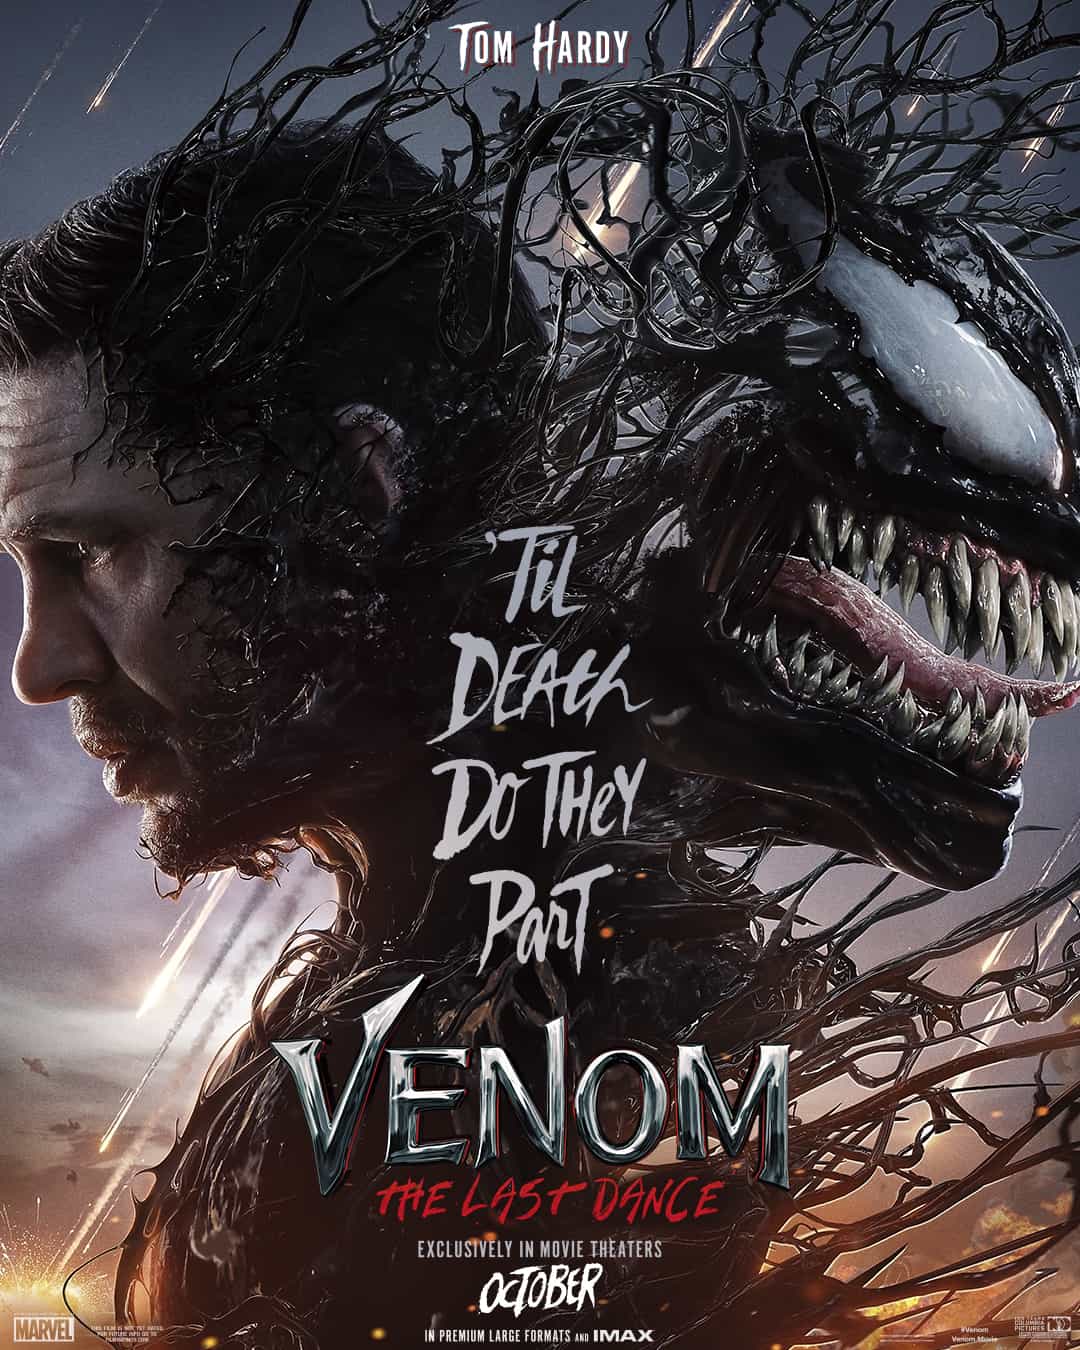 Check out the new trailer and poster for upcoming movie Venom: The Last Dance which stars Tom Hardy and Juno Temple - movie UK release date 25th October 2024 #venomthelastdance